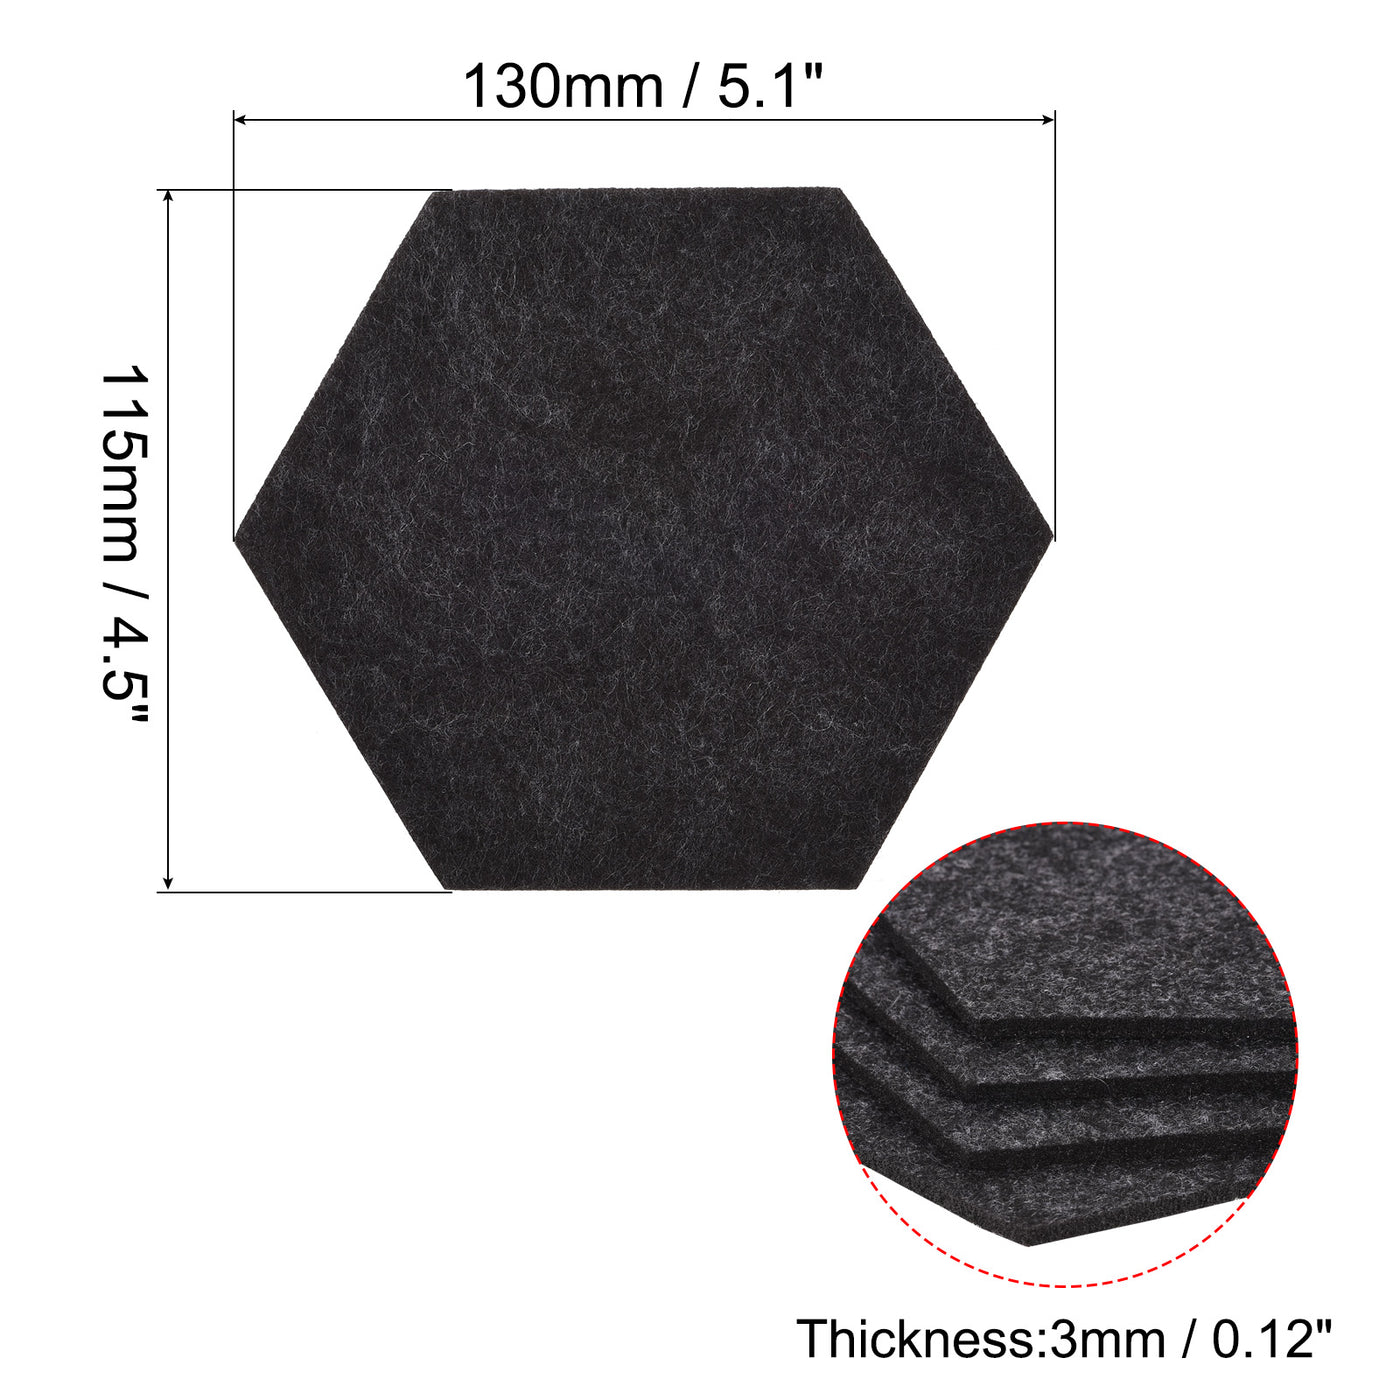 uxcell Uxcell Felt Coasters 9pcs Absorbent Pad Coaster for Drink Cup Pot Bowl Vase Dark Grey